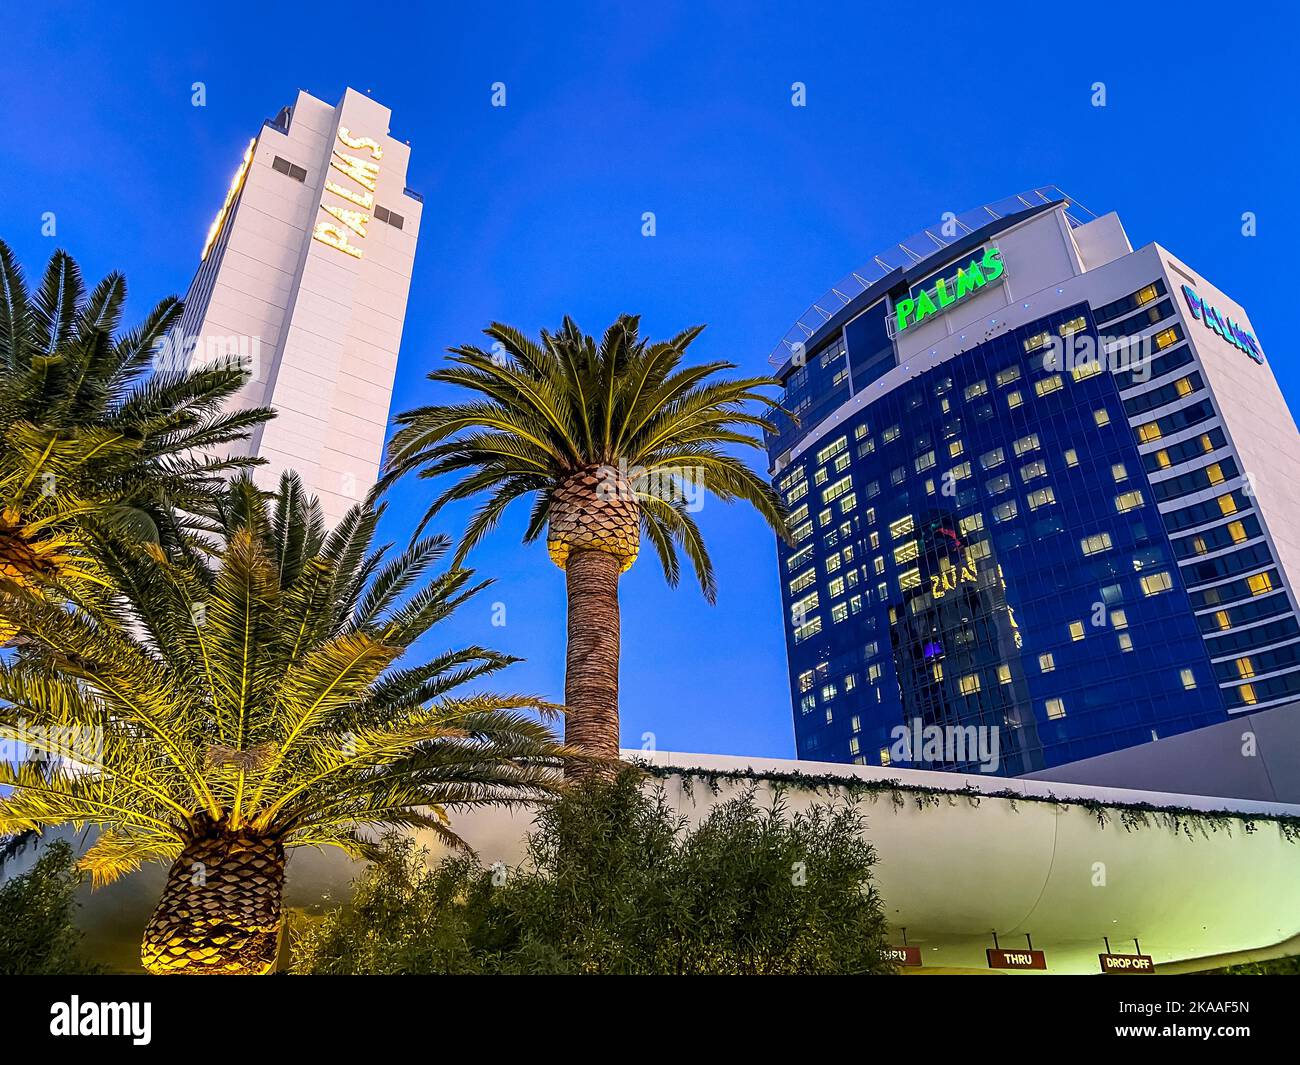 LAS VEGAS - MAY 12 : The Interior Of Mandalay Bay Resort On May 12, 2014 In Las  Vegas. The Resort, Which Opened In 1999, Has 3,309 Hotel Rooms, 24  Elevators And